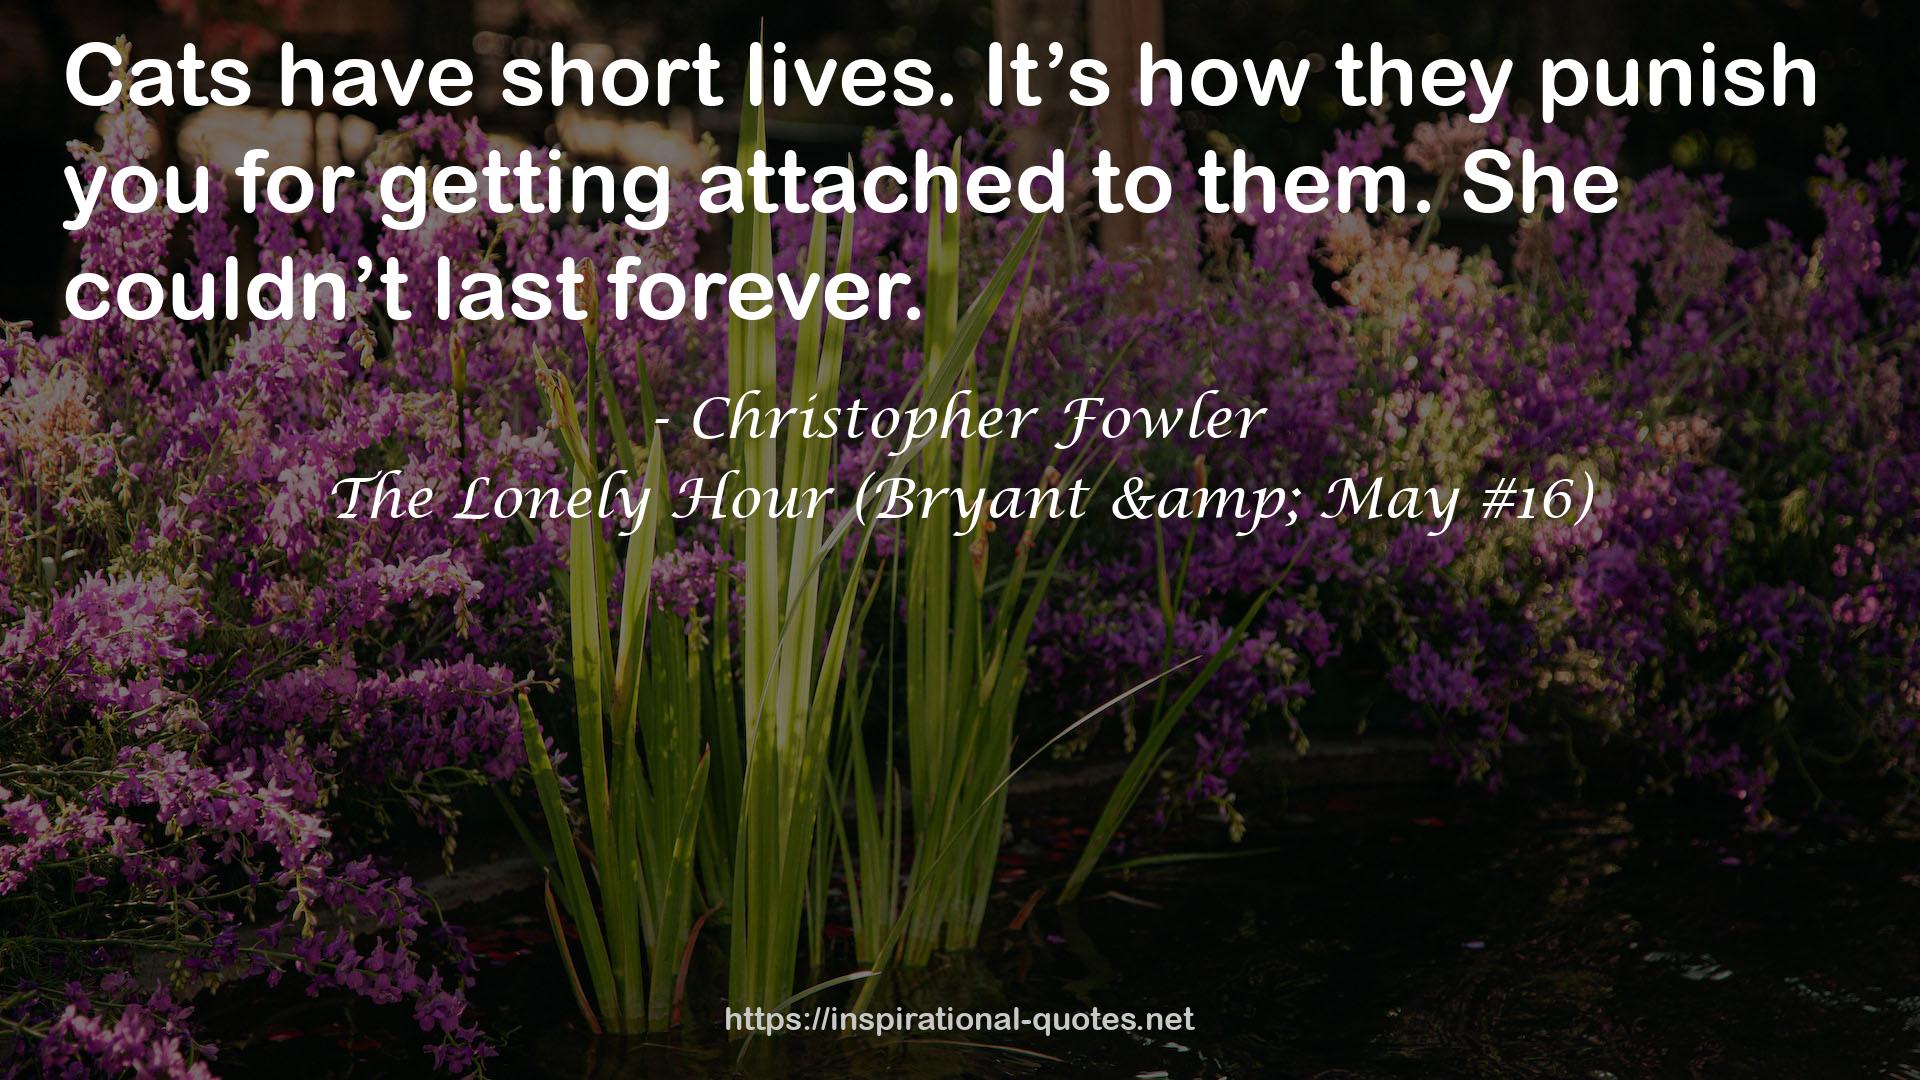 Christopher Fowler QUOTES